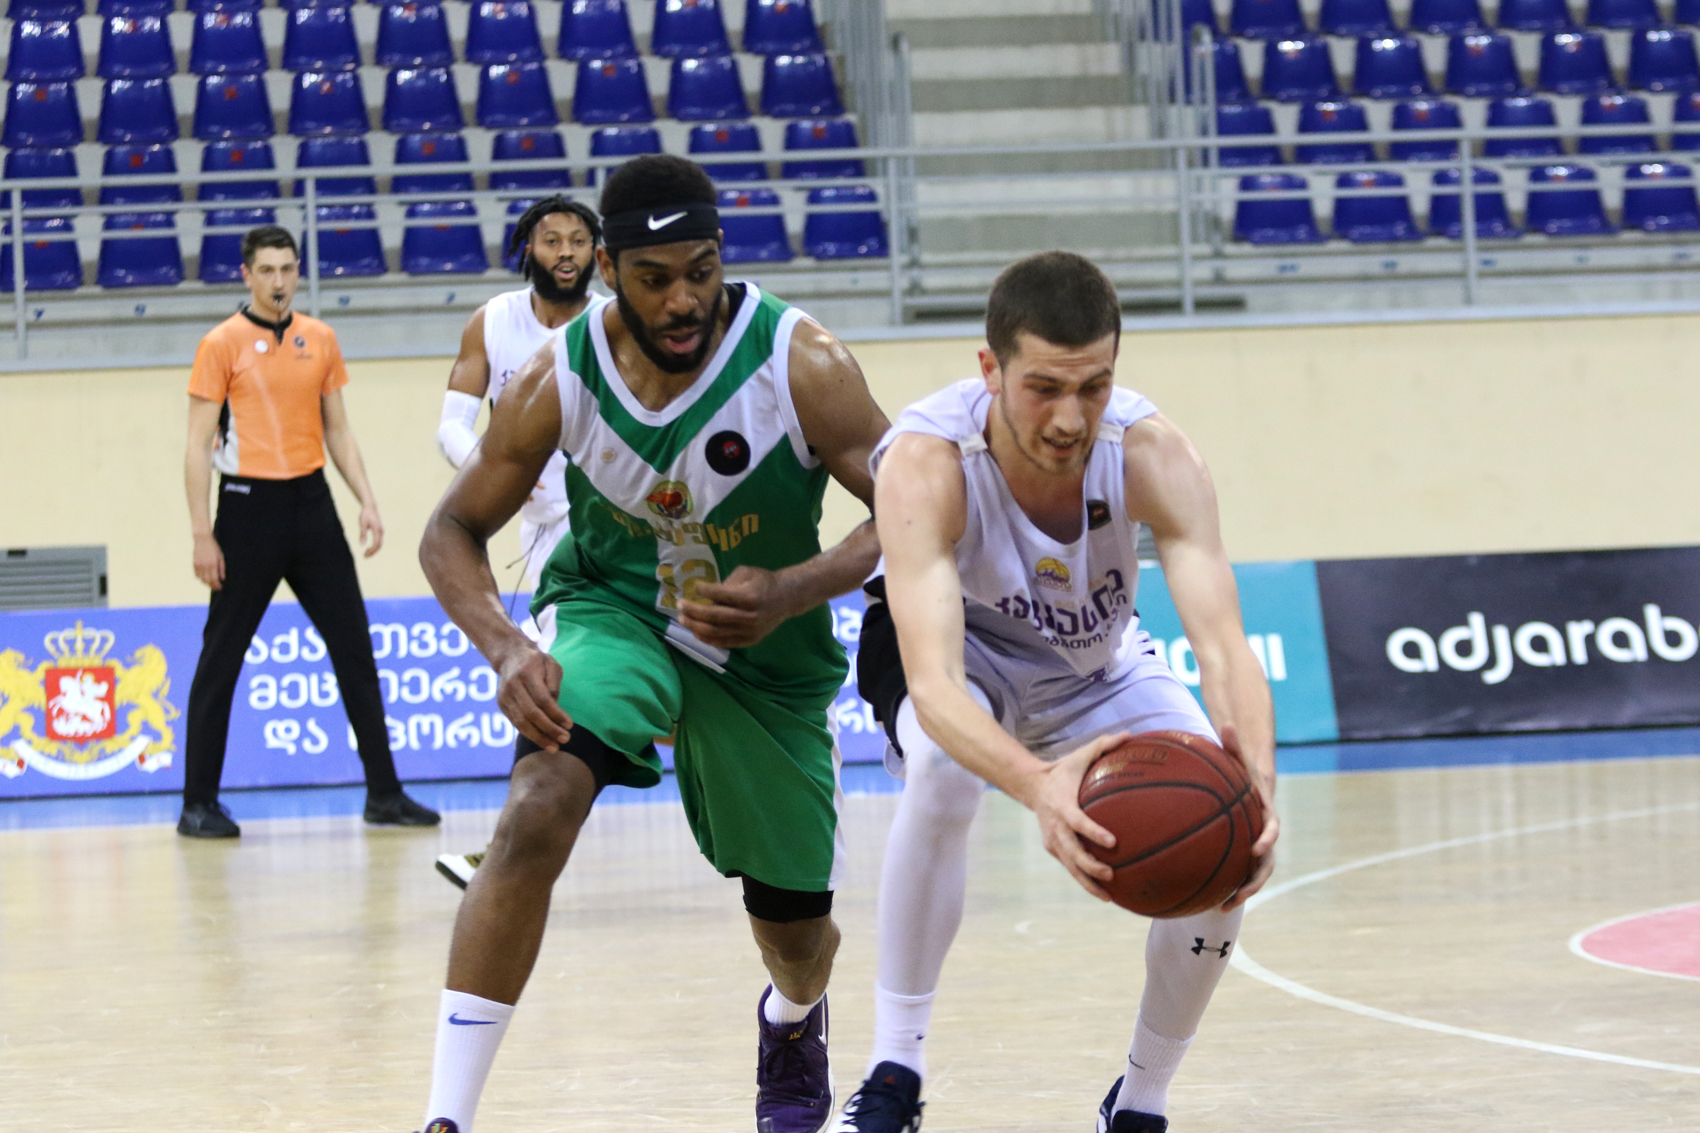 Kavkasia defeated Zestaponi convincingly and joined Mega in the A League final